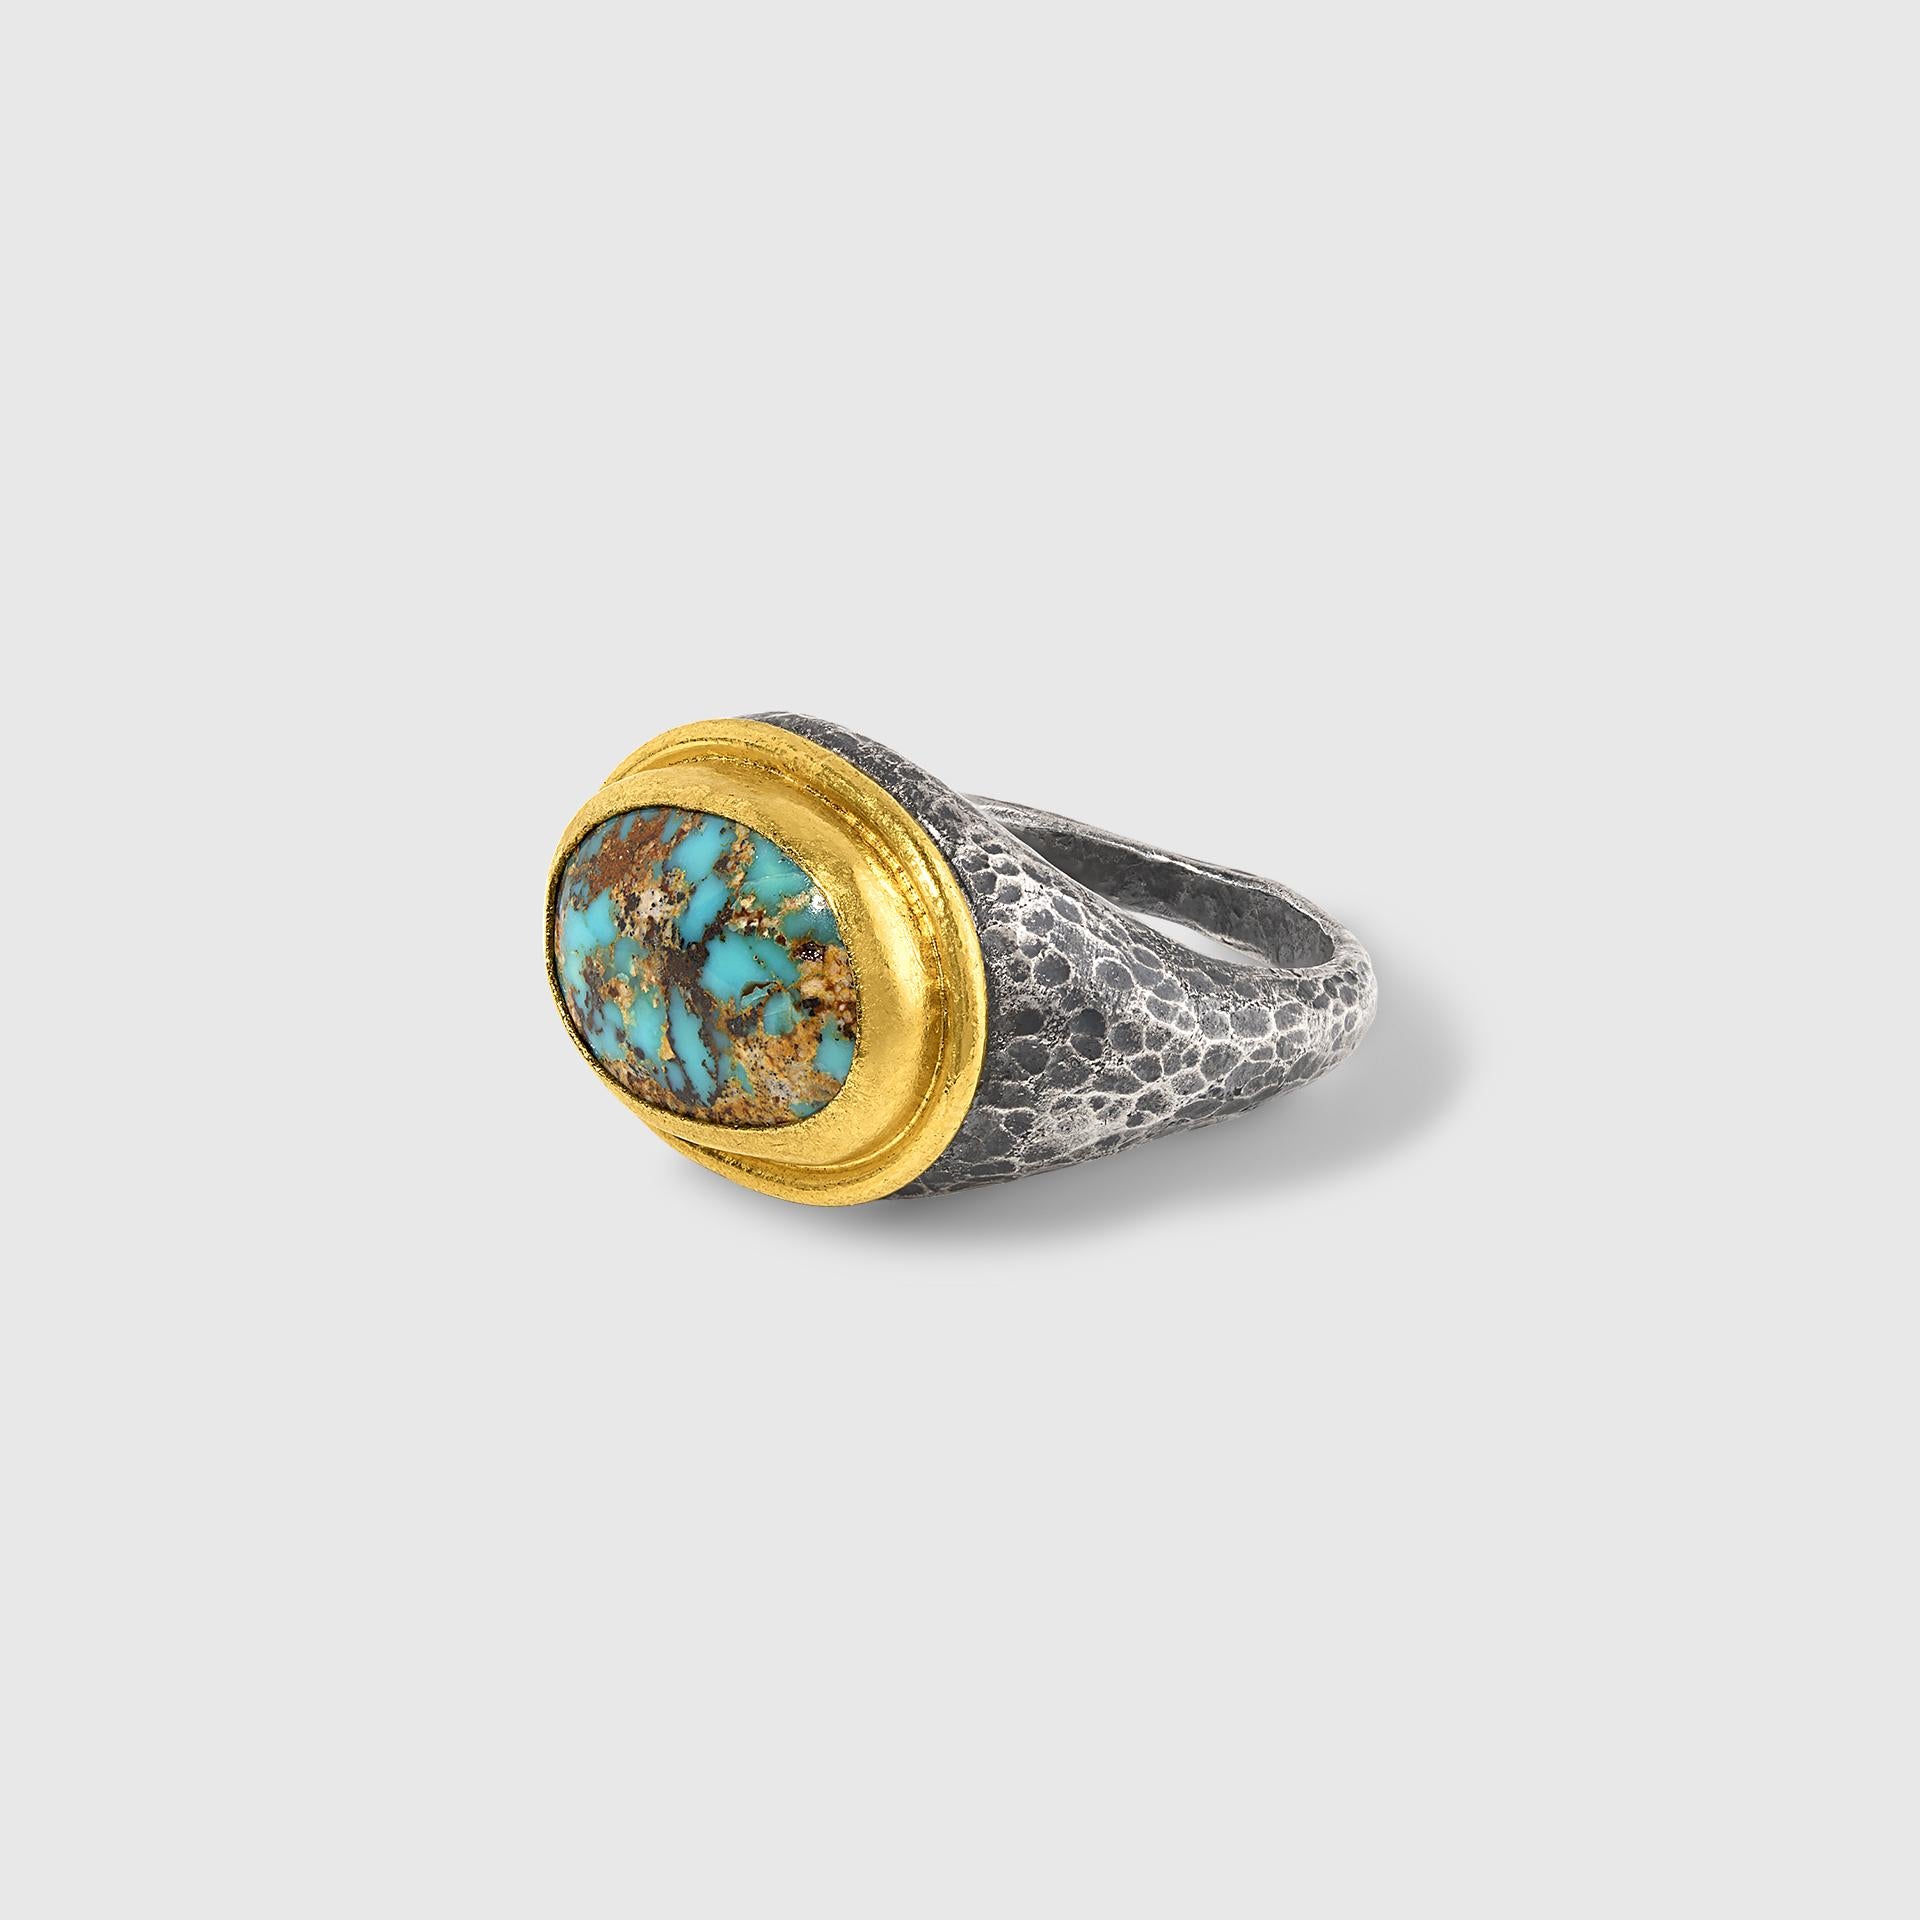 1 Carat Organic Oval Turquoise Brown Teal Green Ring 24K Gold & Sterling In New Condition For Sale In Bozeman, MT